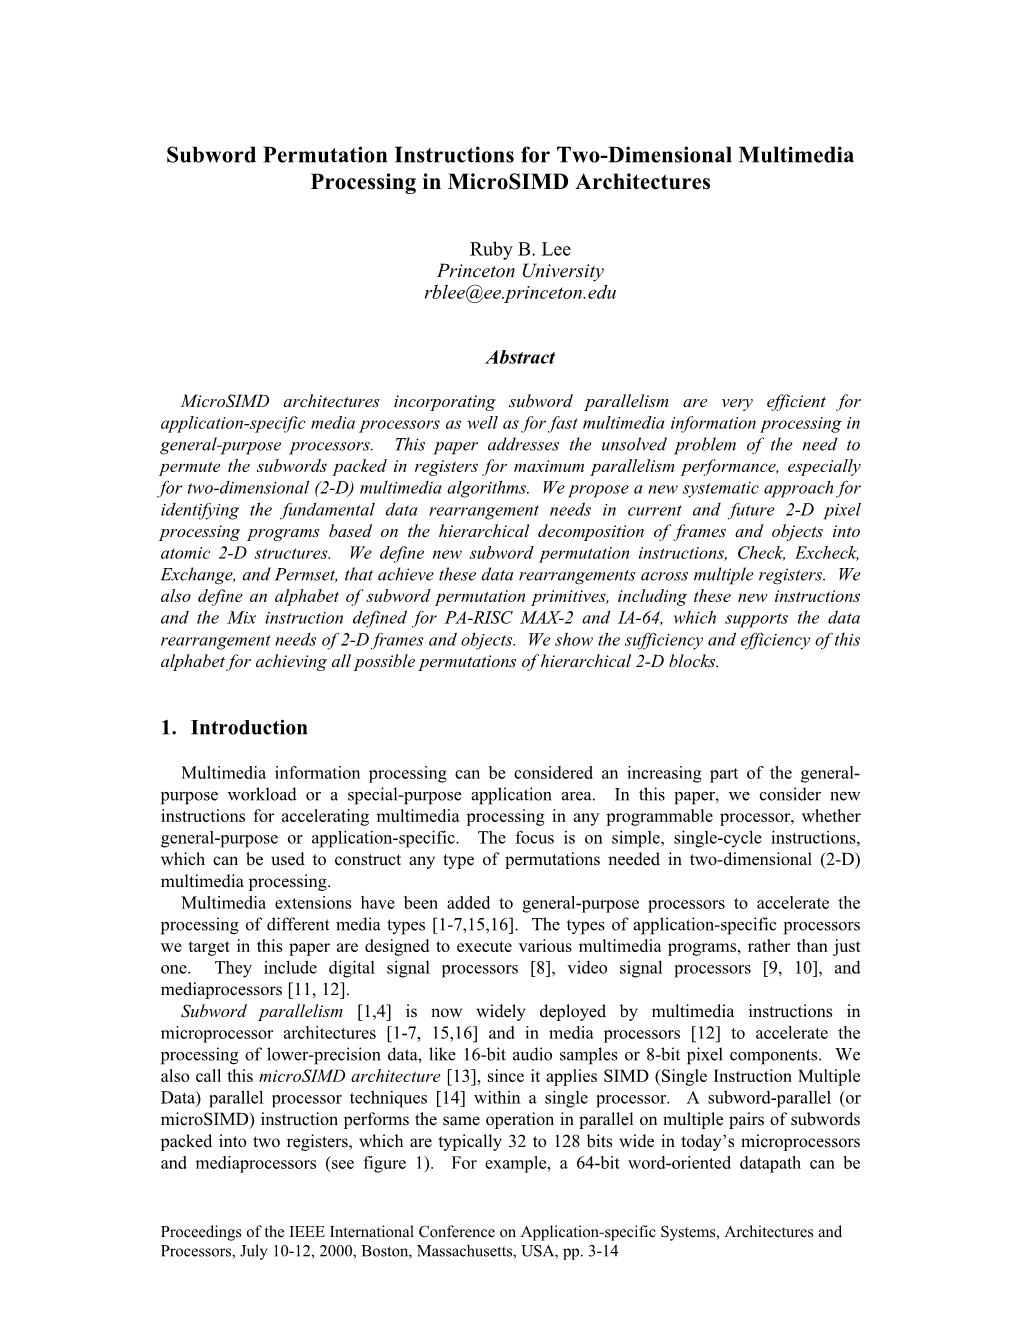 Subword Permutation Instructions for Two-Dimensional Multimedia Processing in Microsimd Architectures